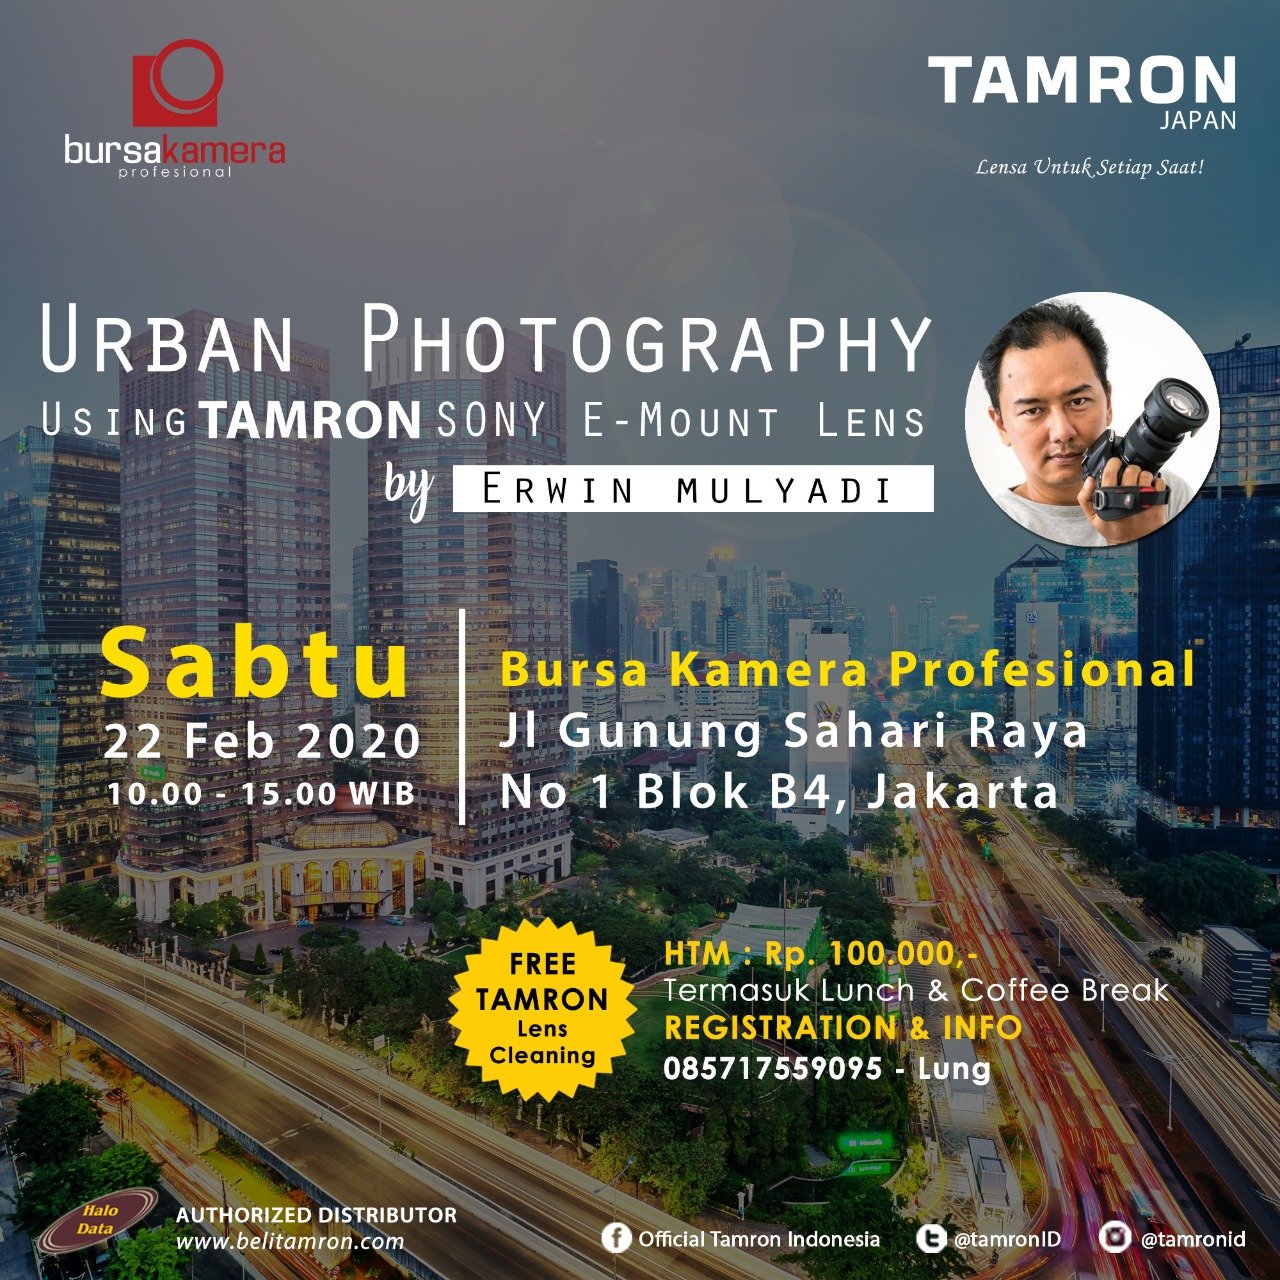 URBAN PHOTOGRAPHY WITH TAMRON